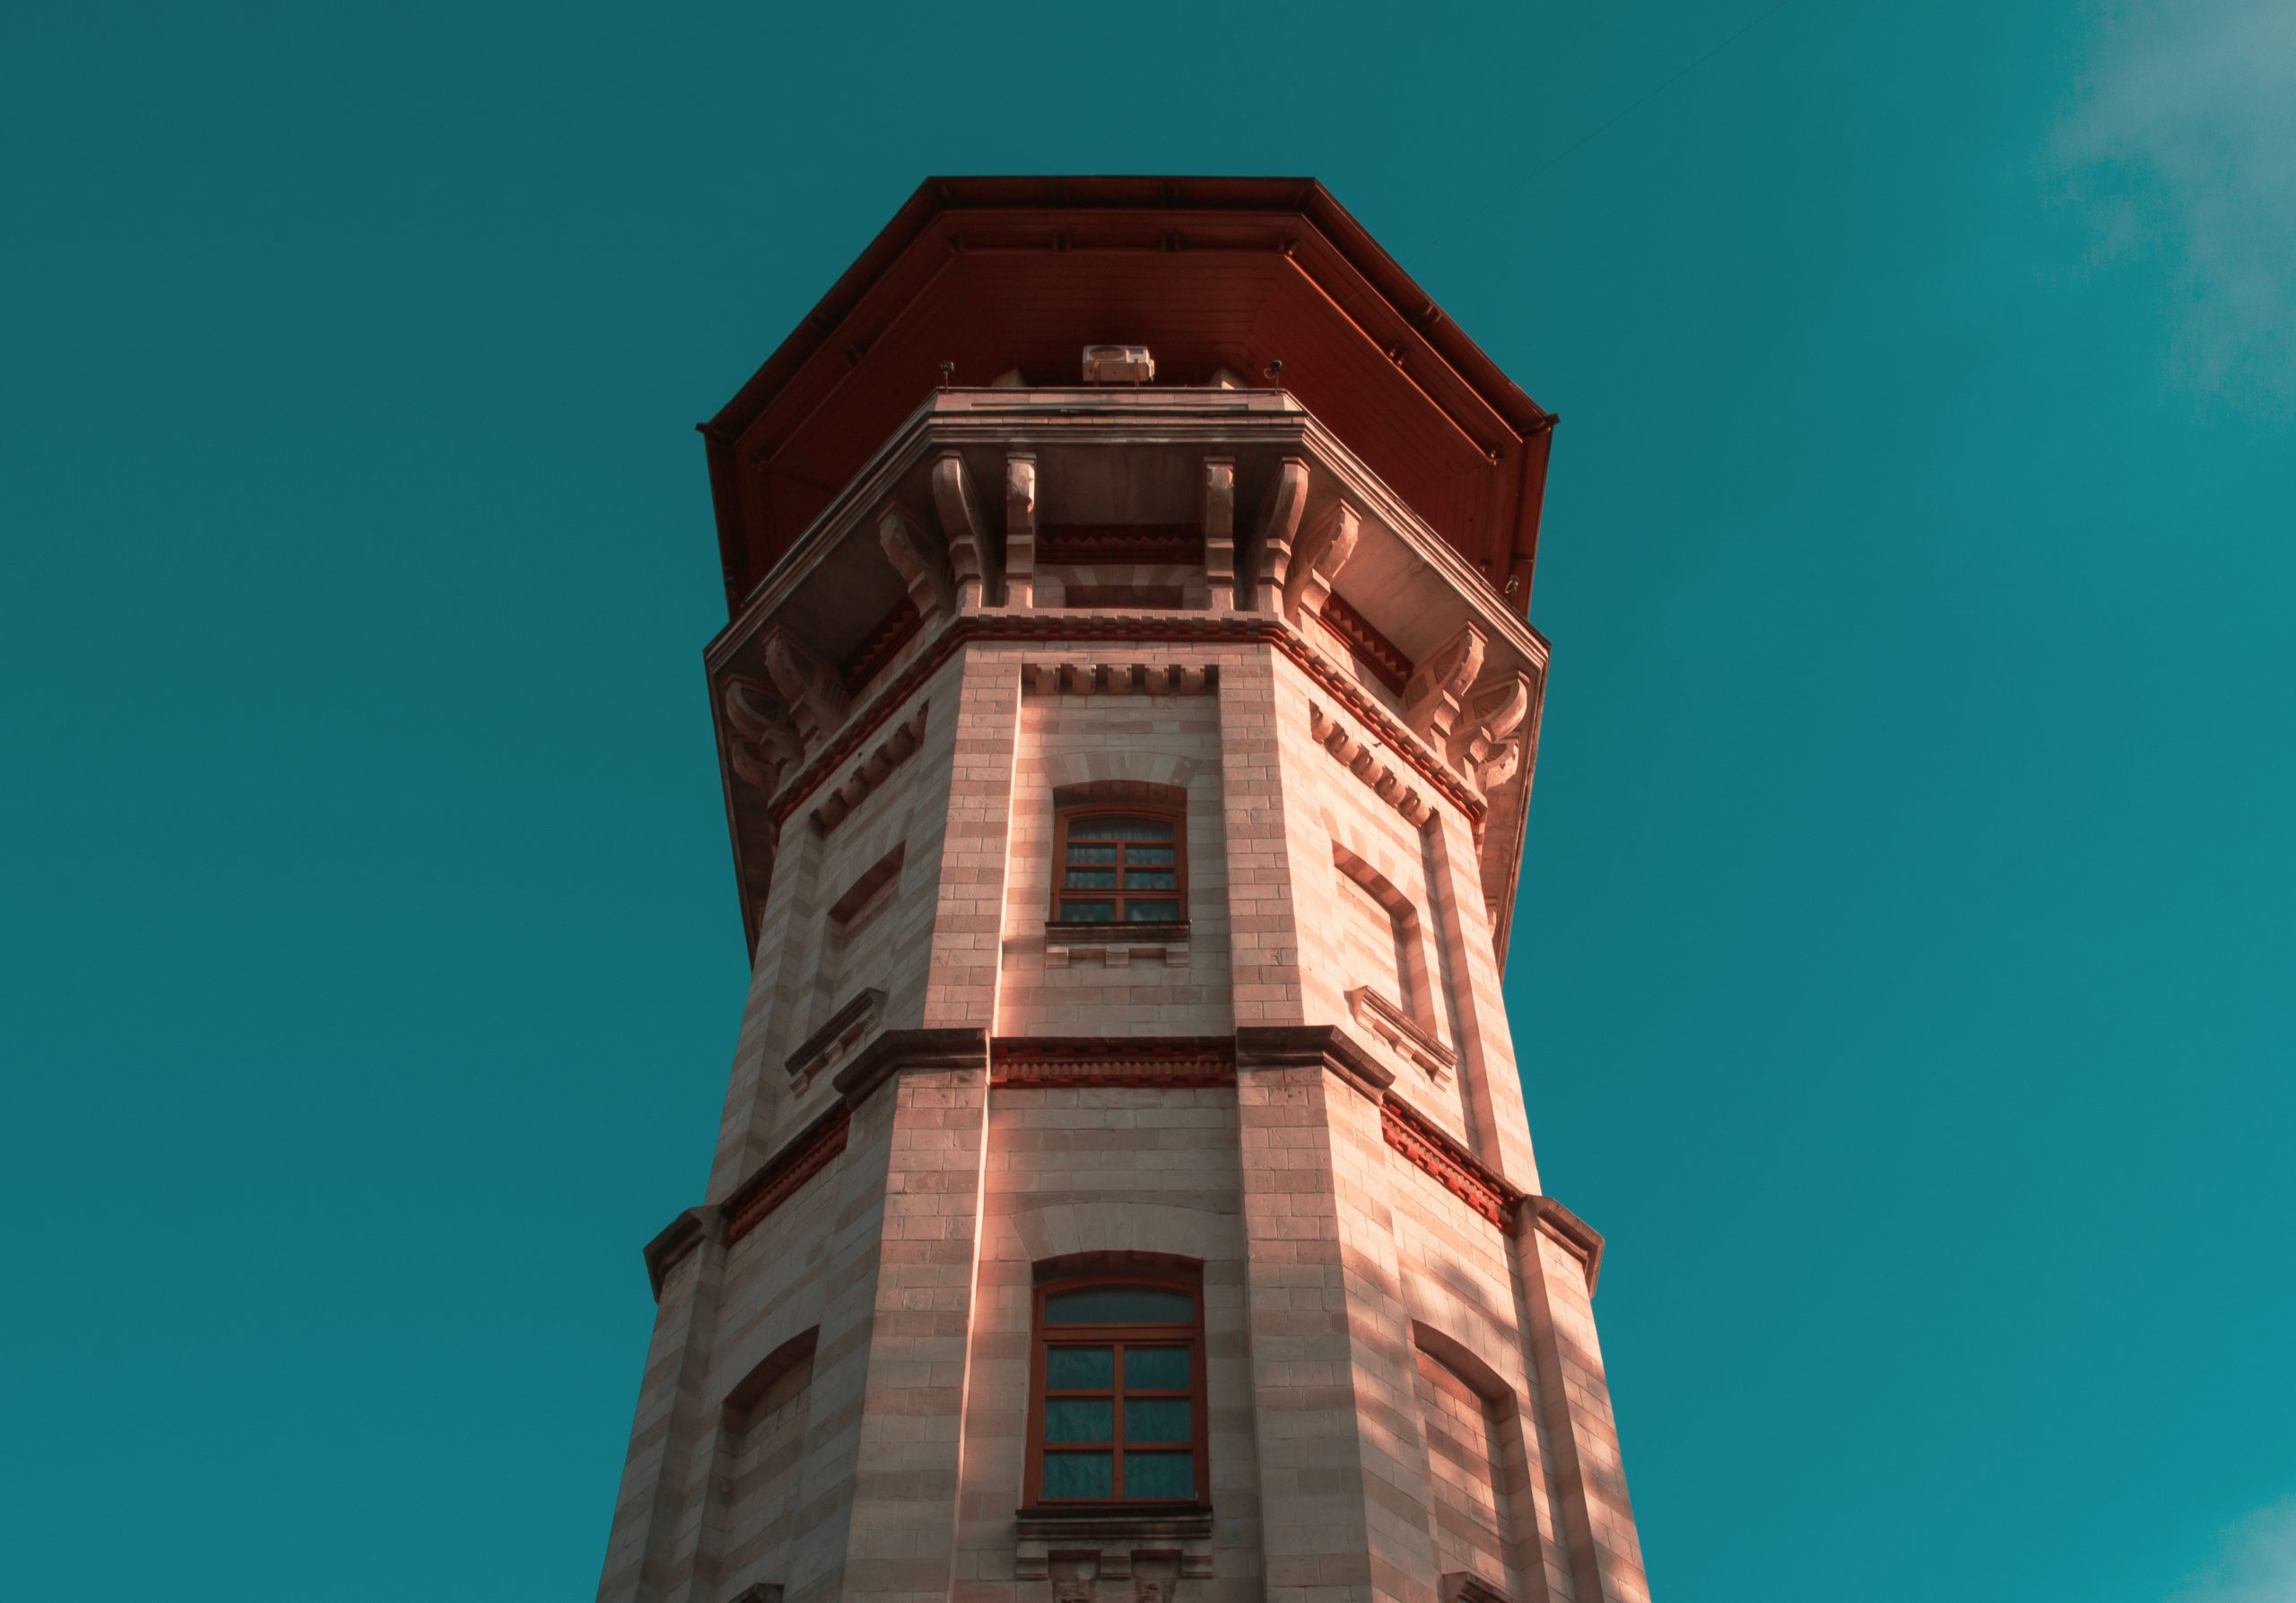 The Water Tower that currently hosts Chișinău City Museum, which contains items dating from 15th to 20th centuries